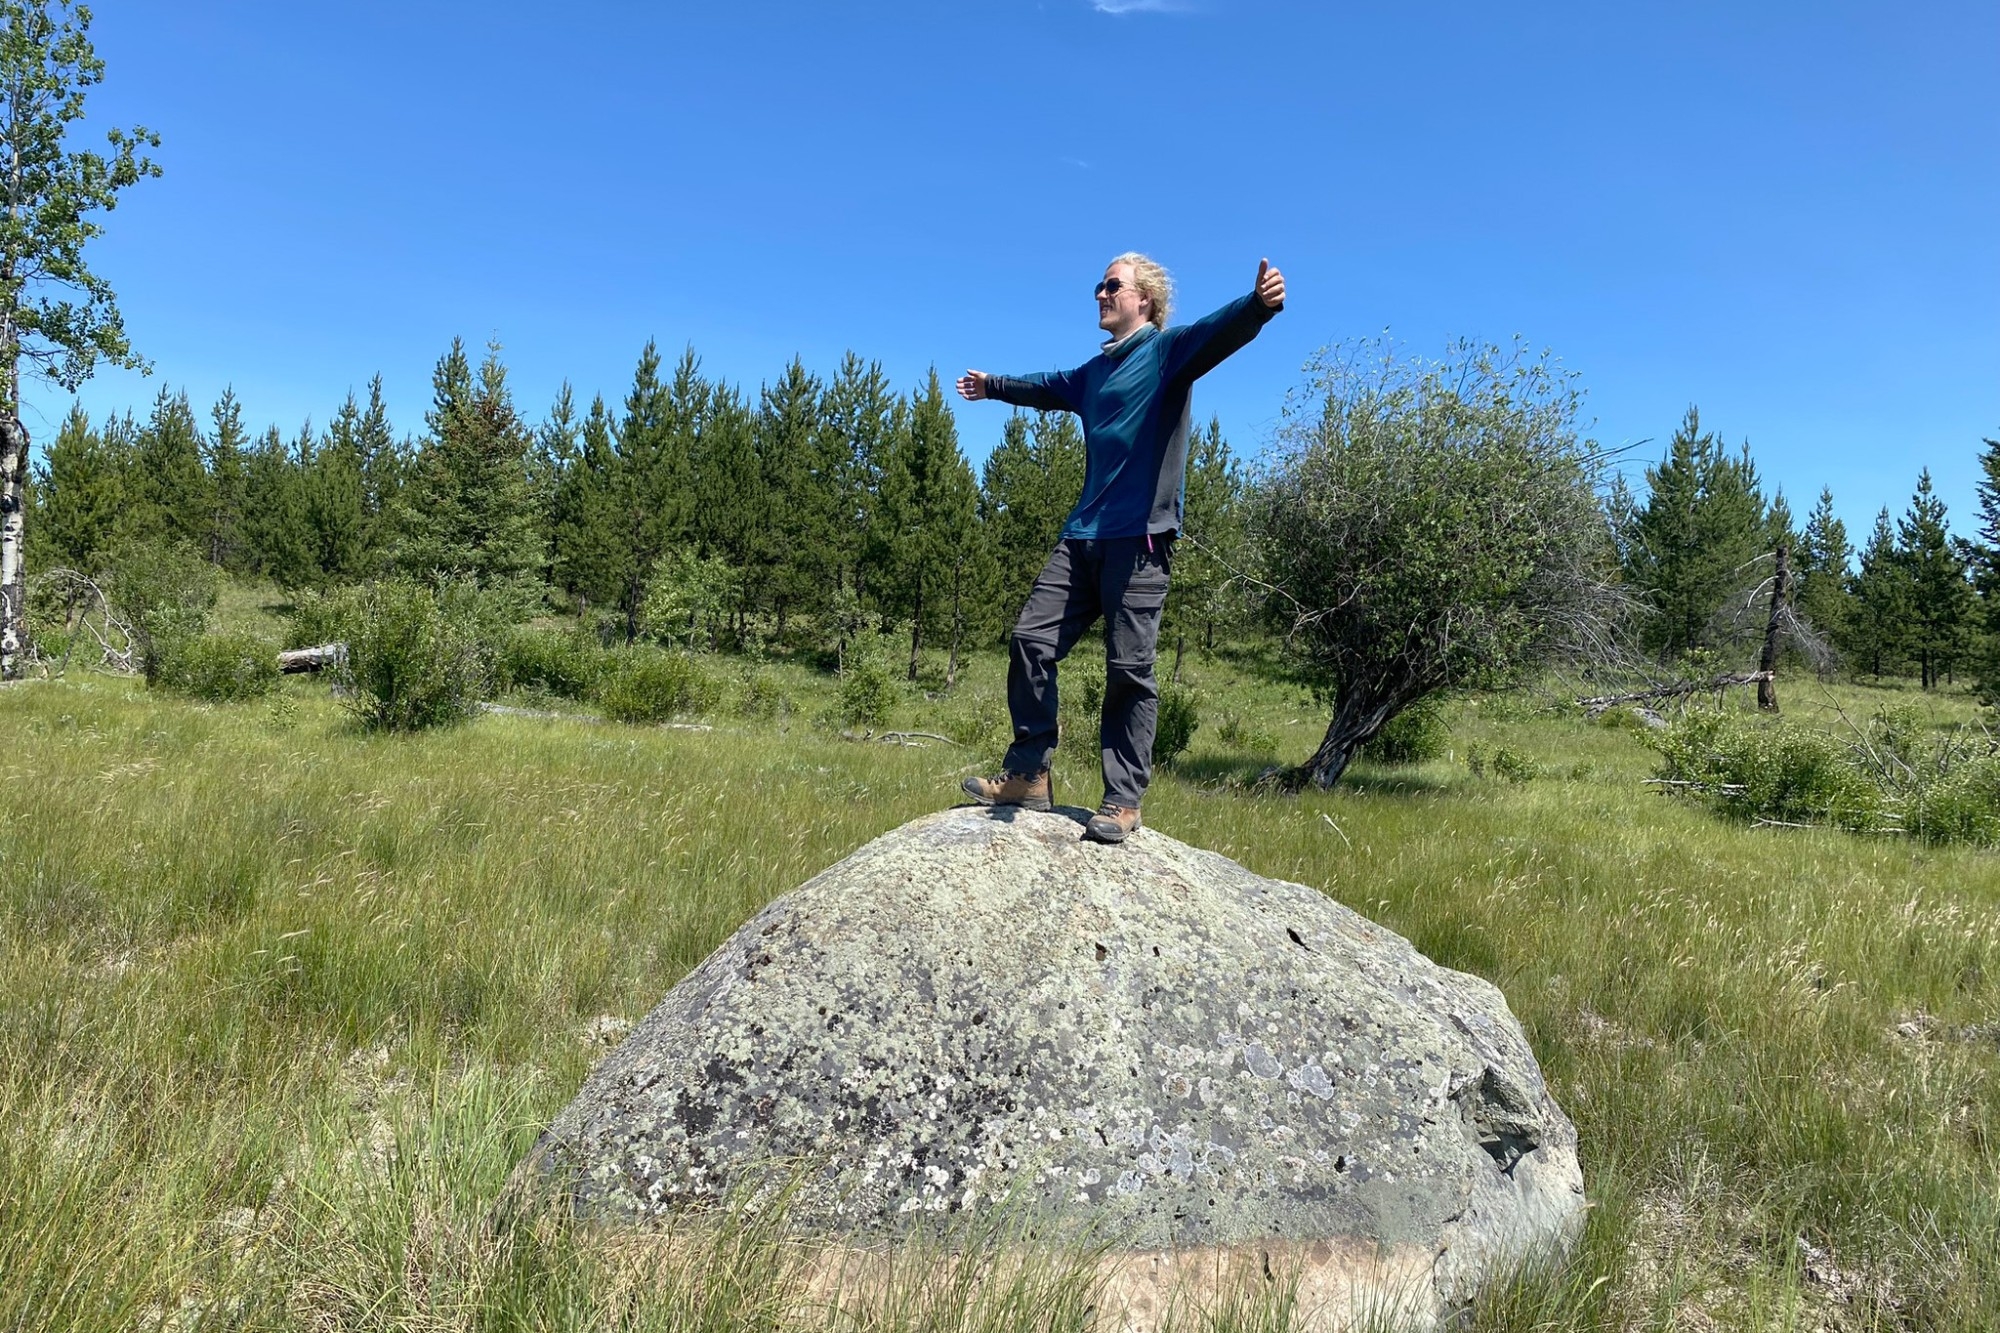 Matthew standing on a large rock with arms outstretched